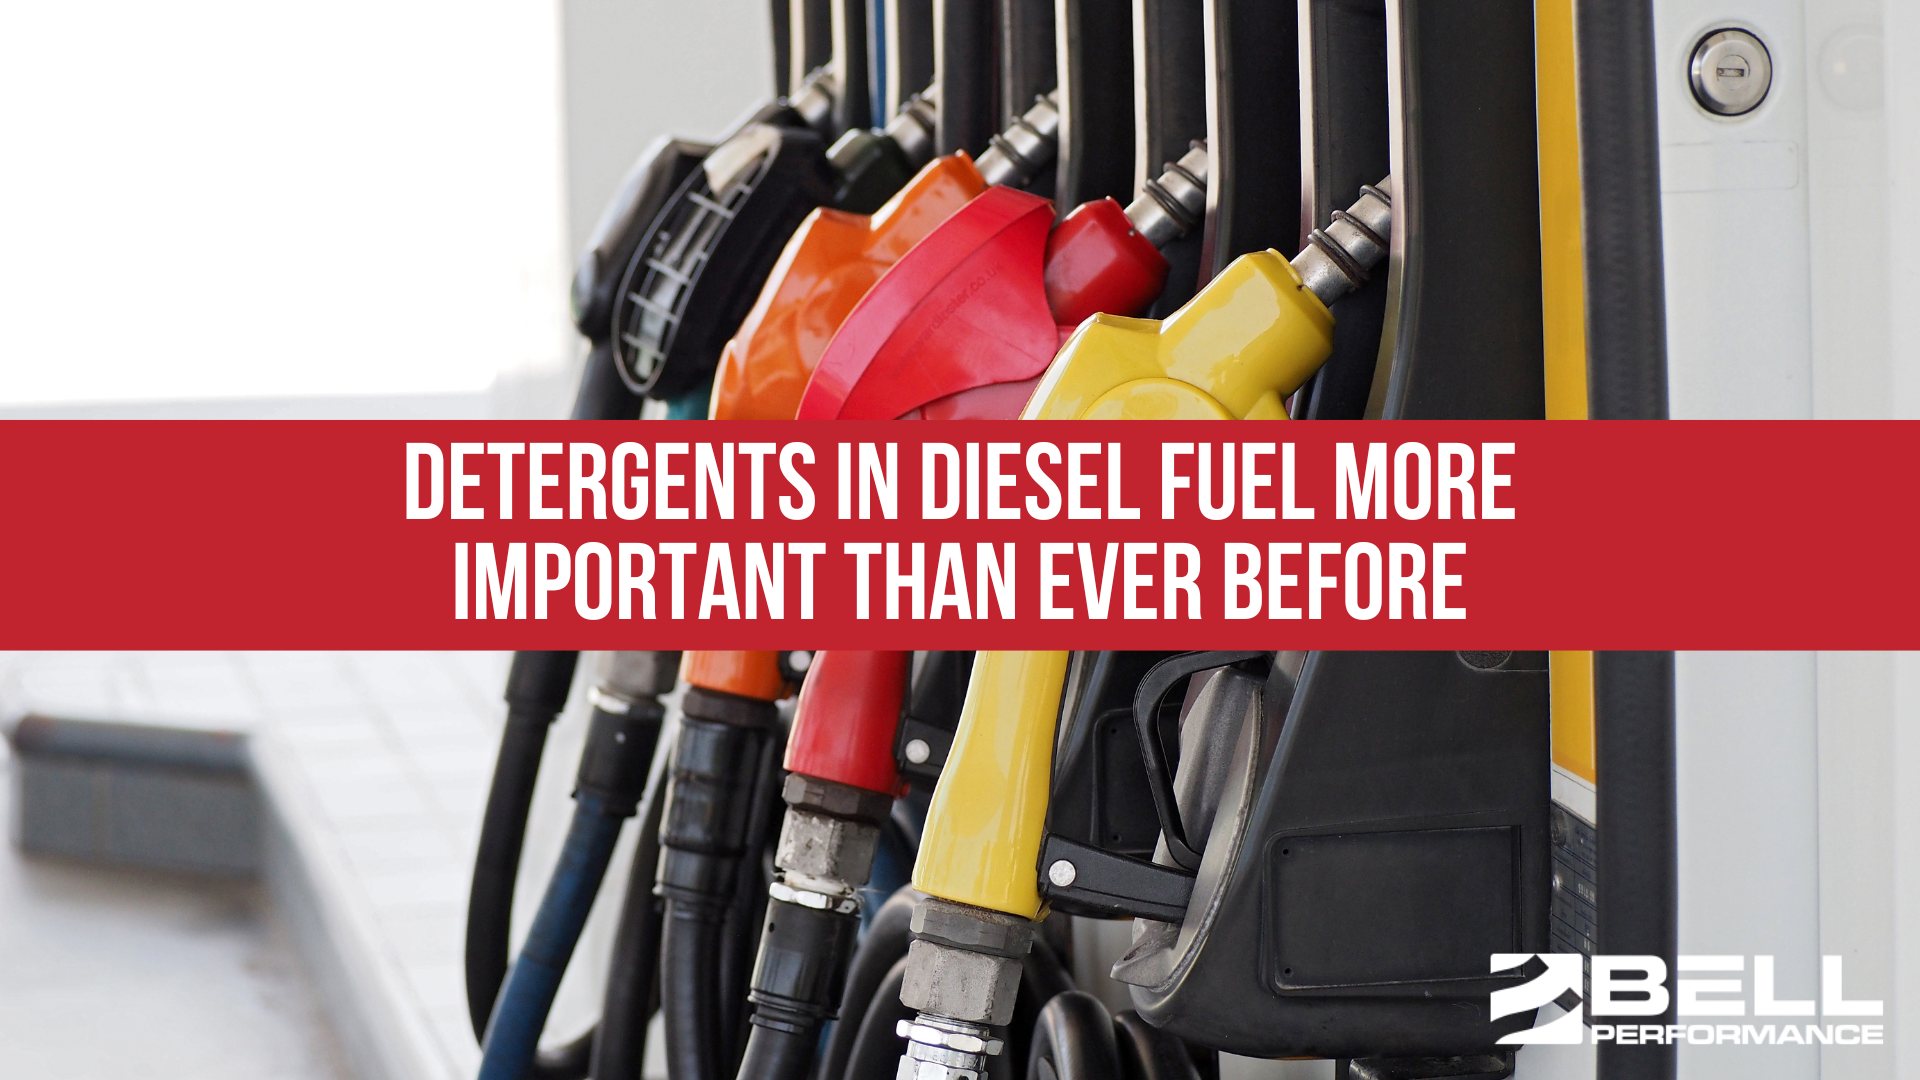 Detergents in Diesel Fuel More Important Than Ever Before